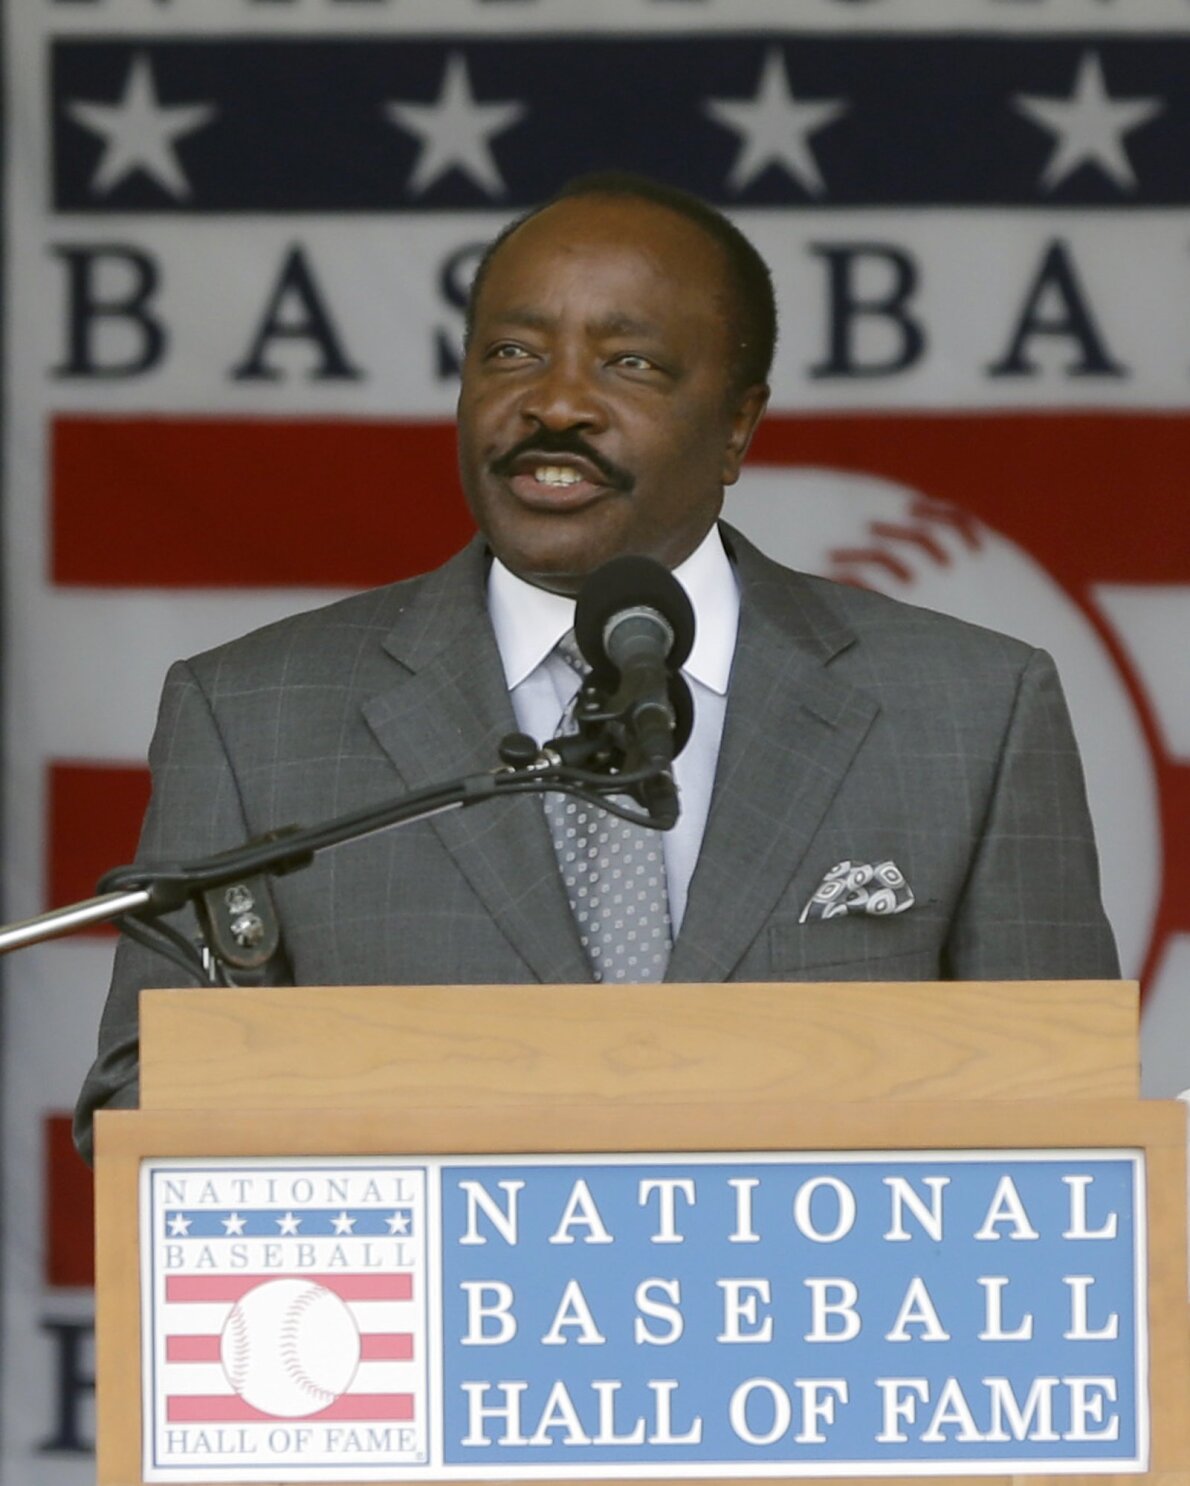 Hall of Famer Joe Morgan, one of Oakland's greatest players, dies at 77